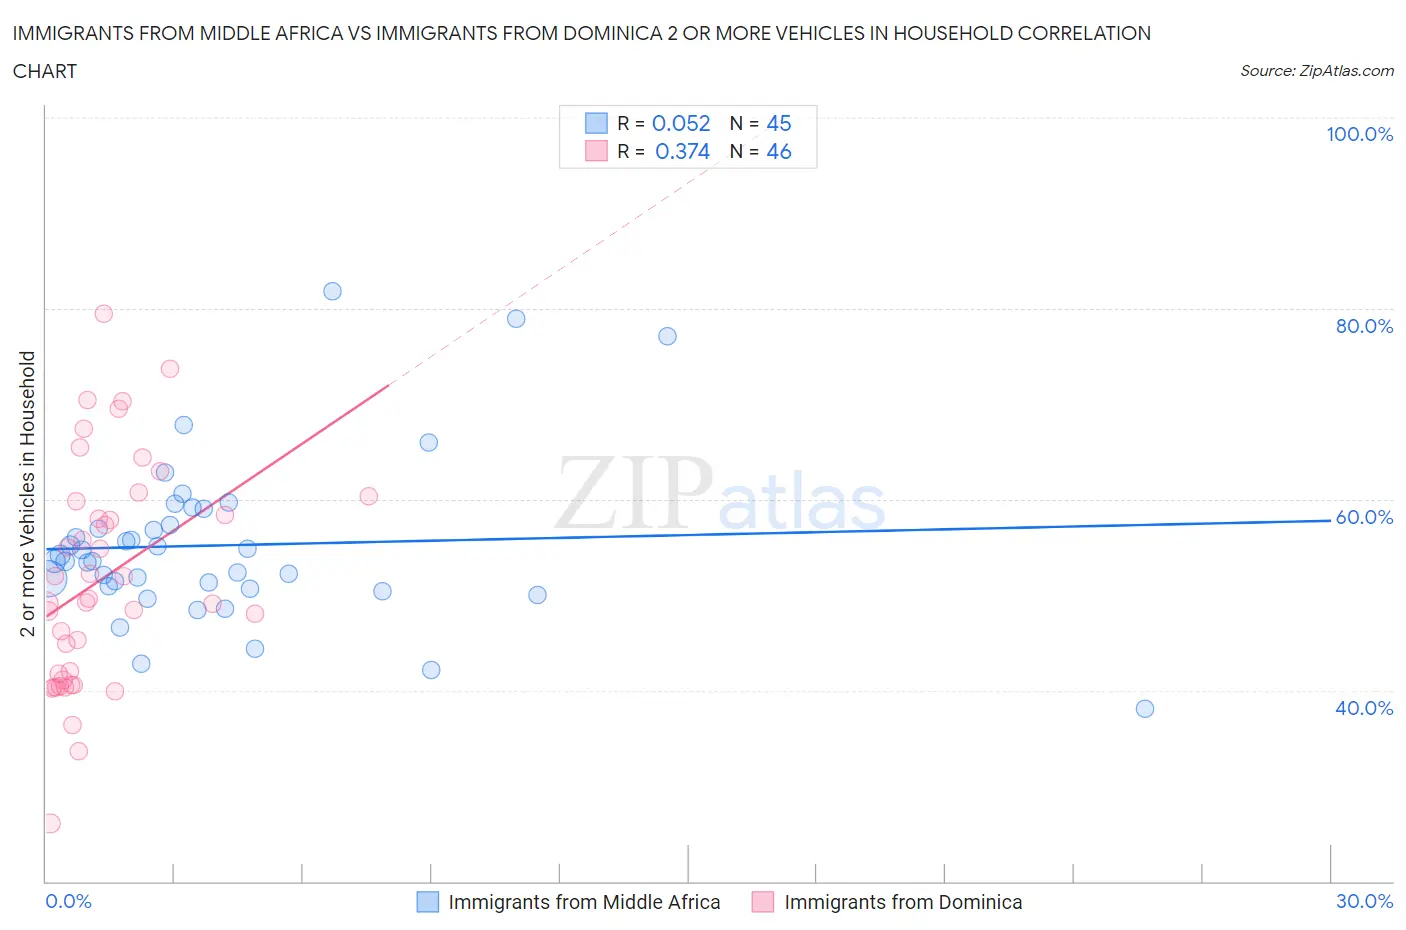 Immigrants from Middle Africa vs Immigrants from Dominica 2 or more Vehicles in Household